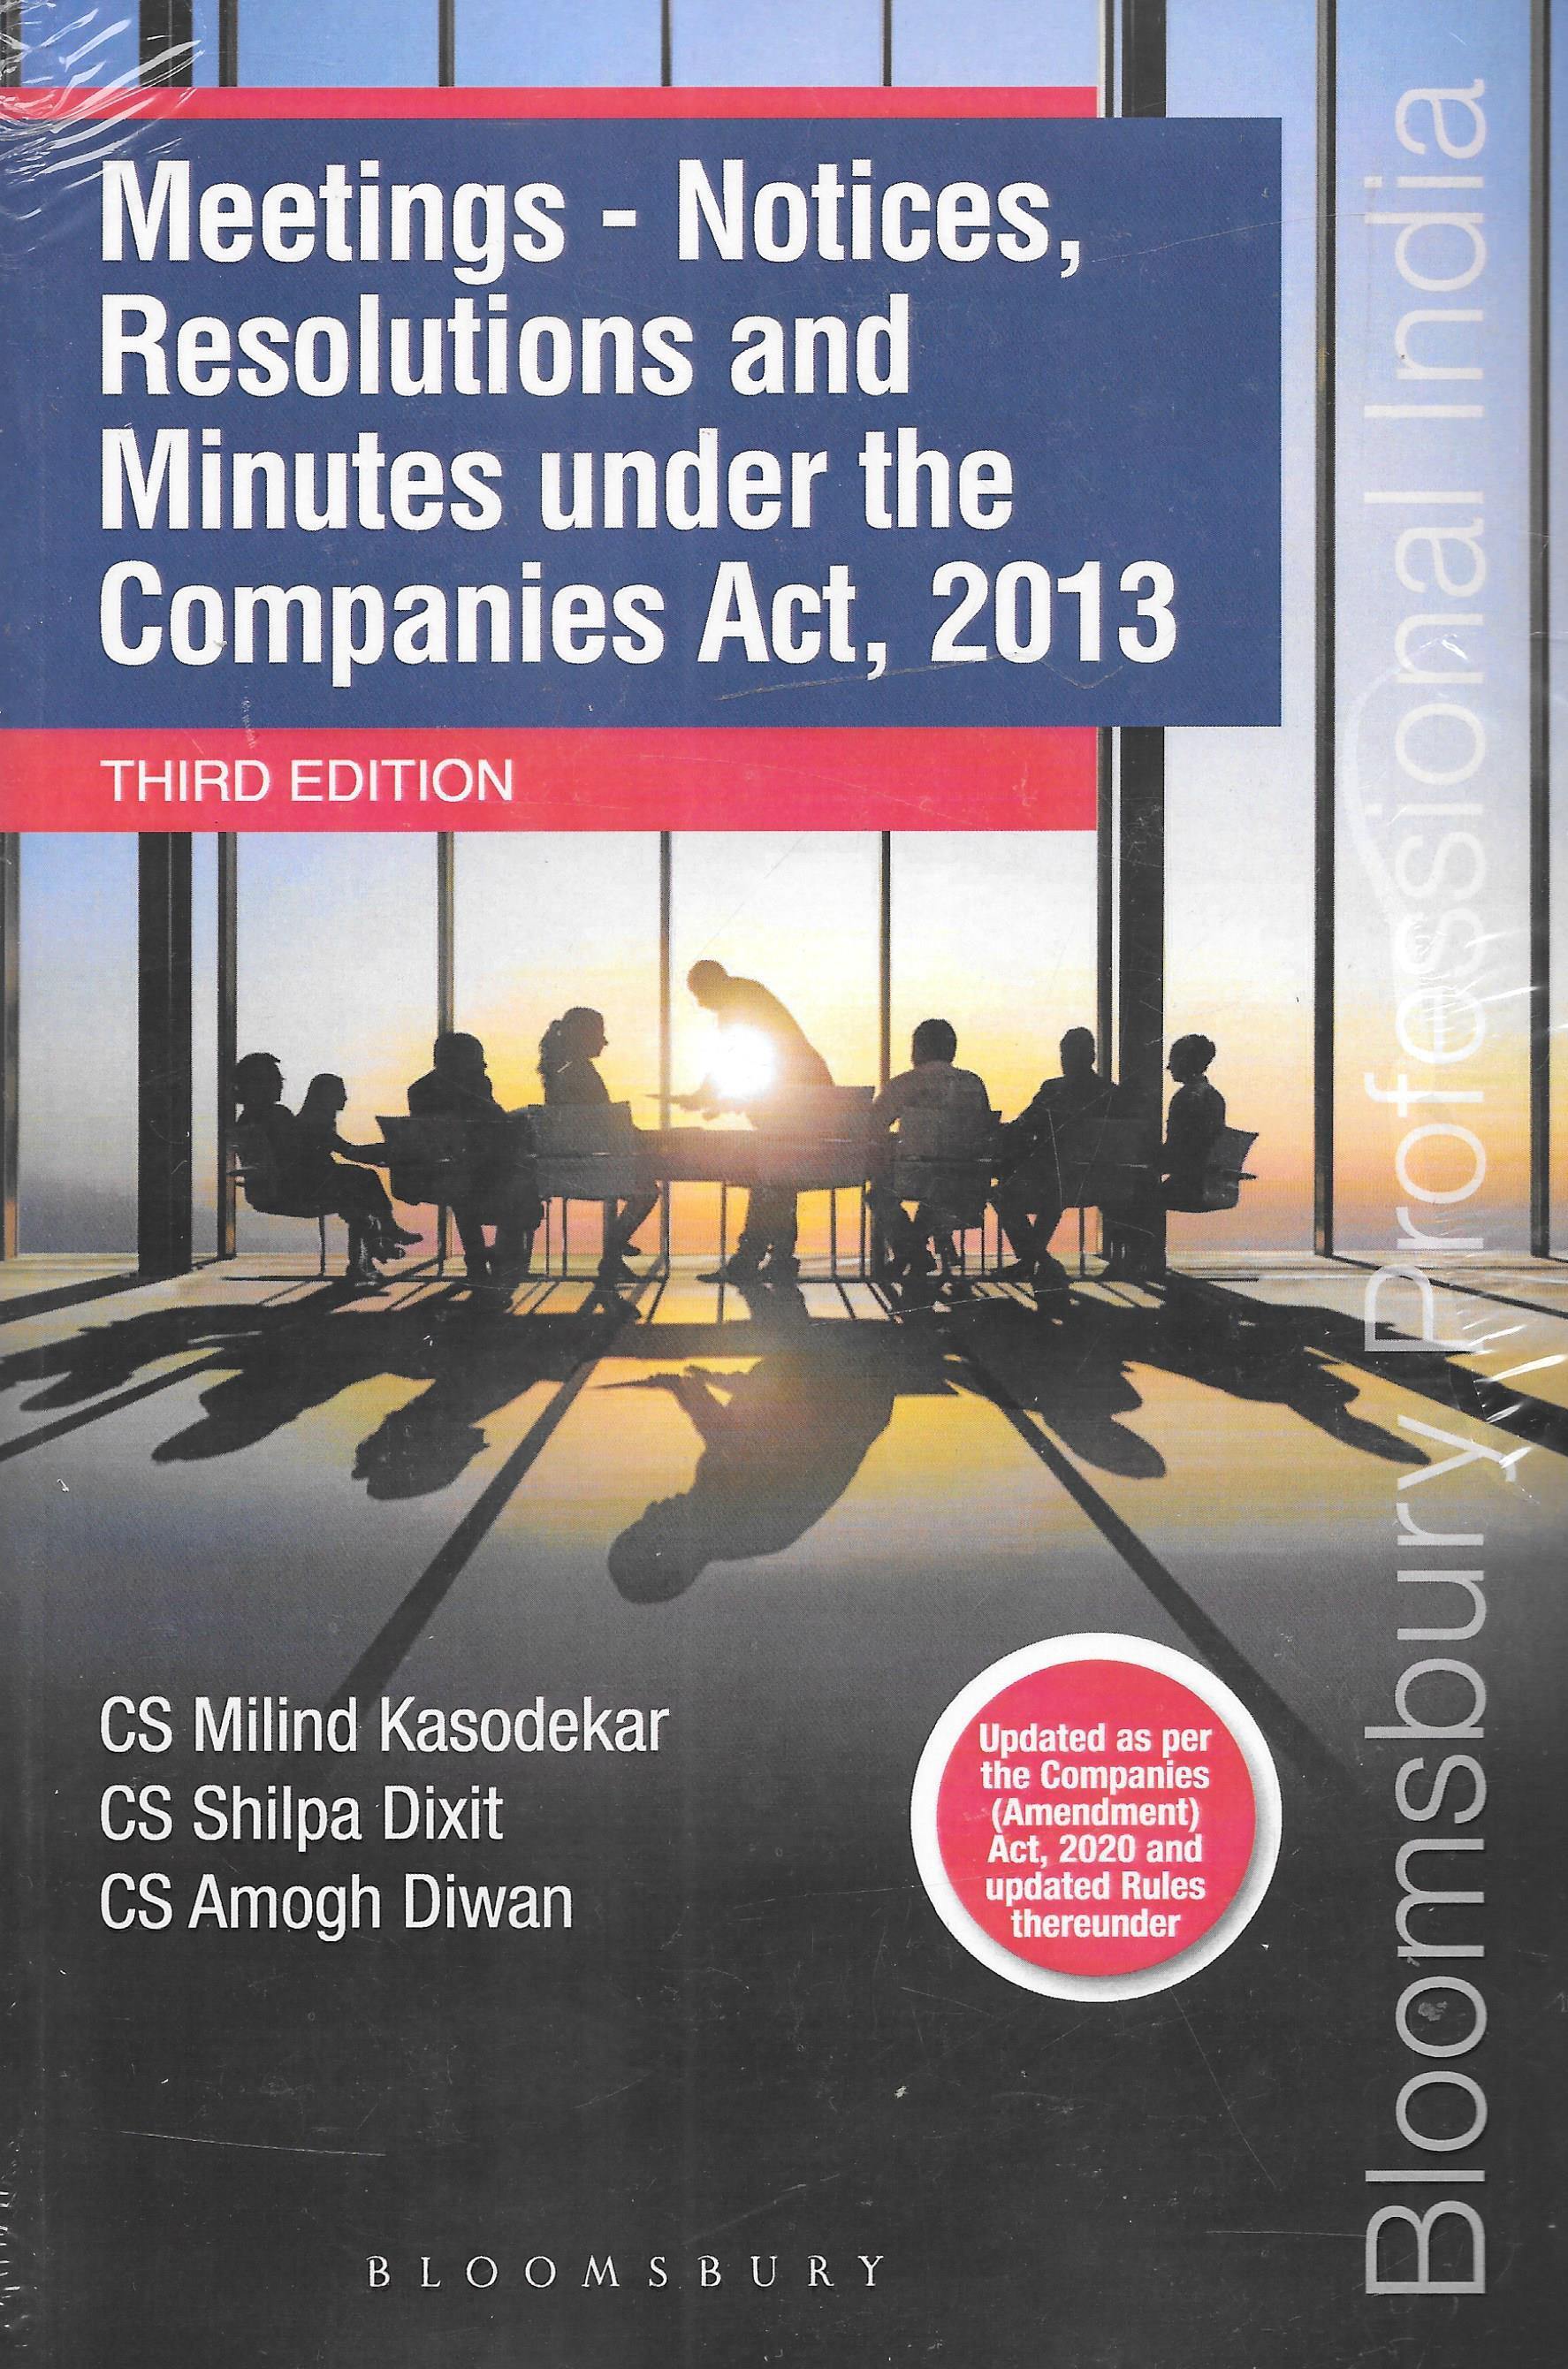 Meetings- Notices, Resolutions and Minutes under the Companies Act, 2013 - M&J Services